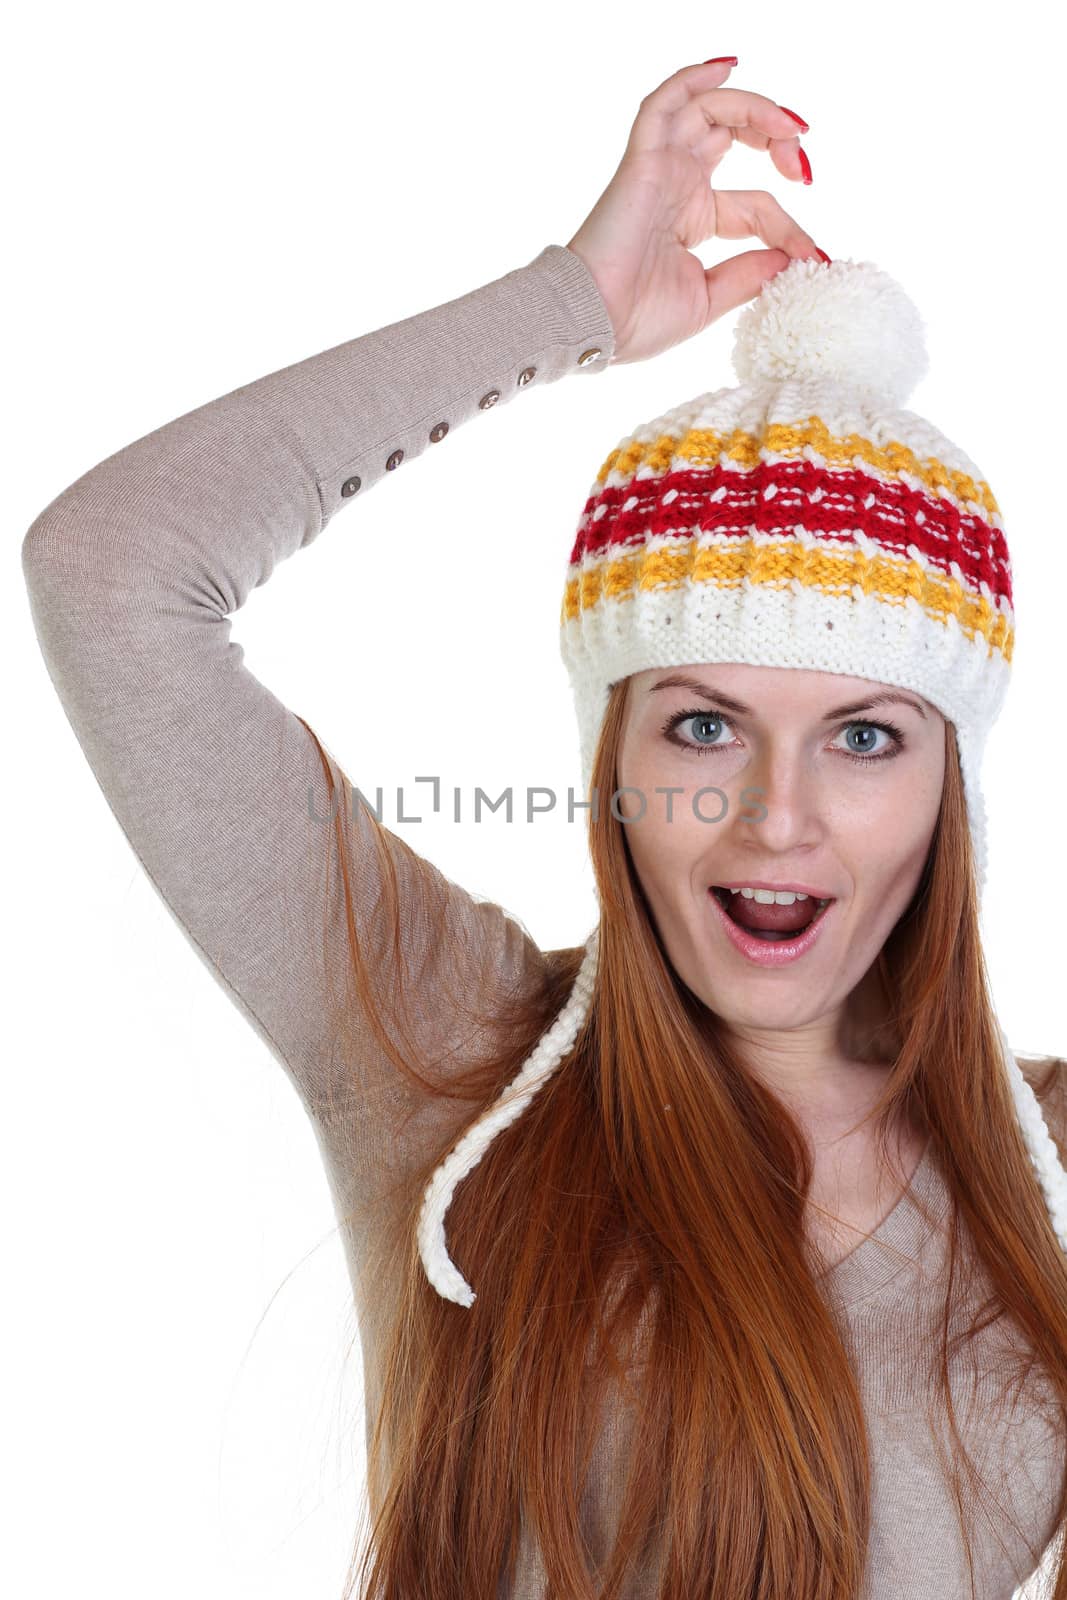 young happy woman in a knitted hat